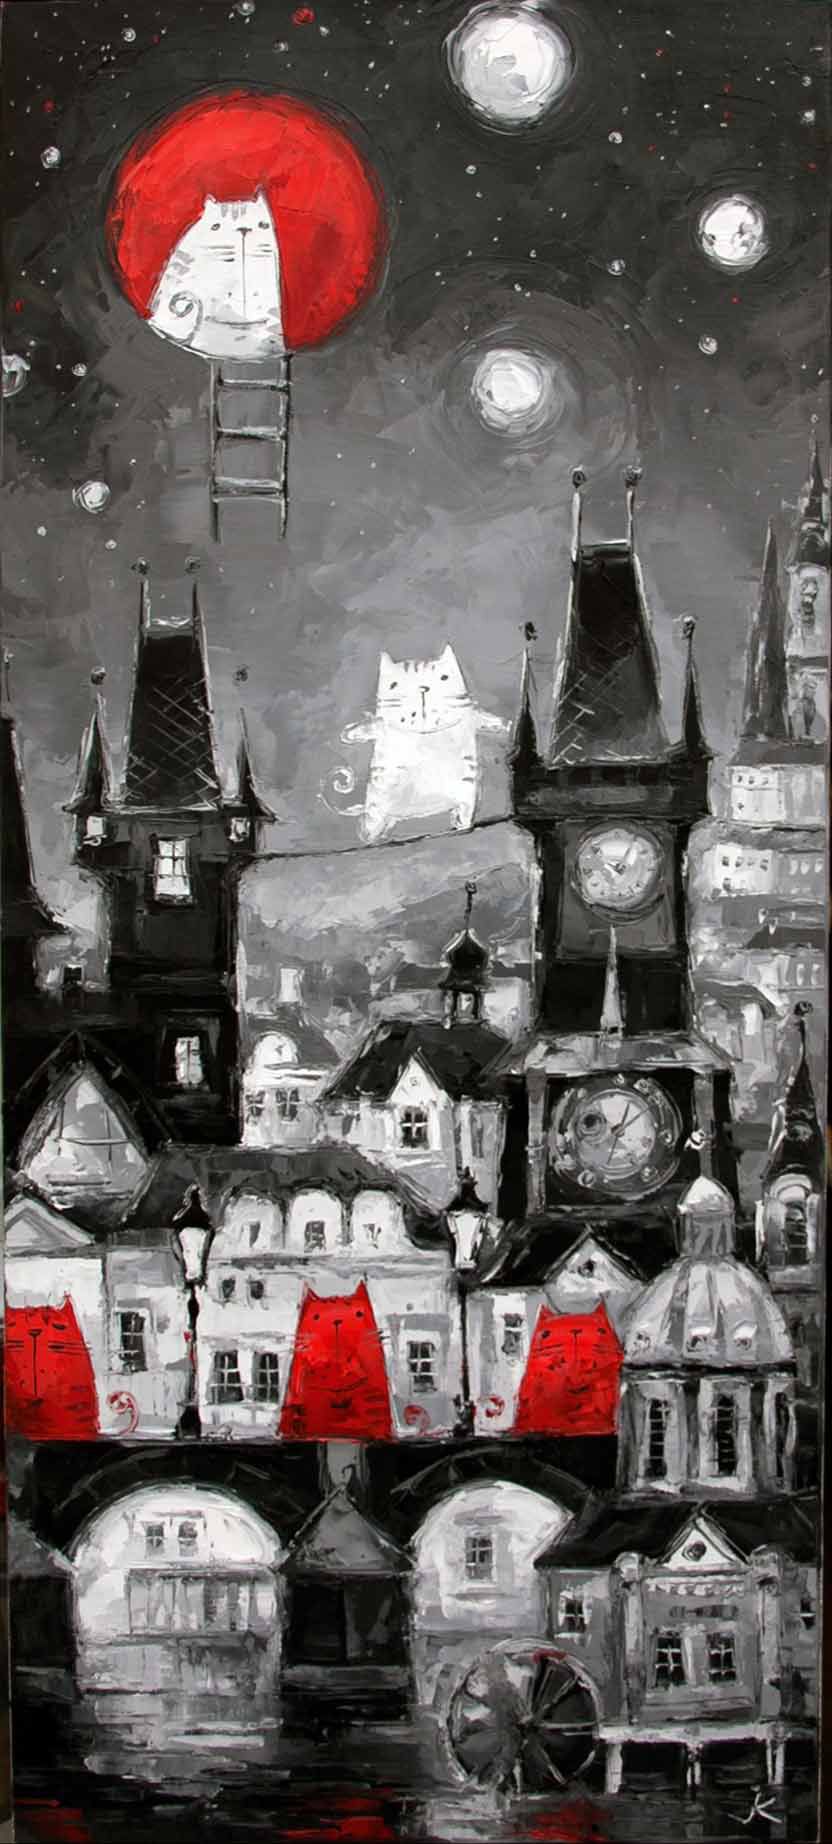 White cat and red moon